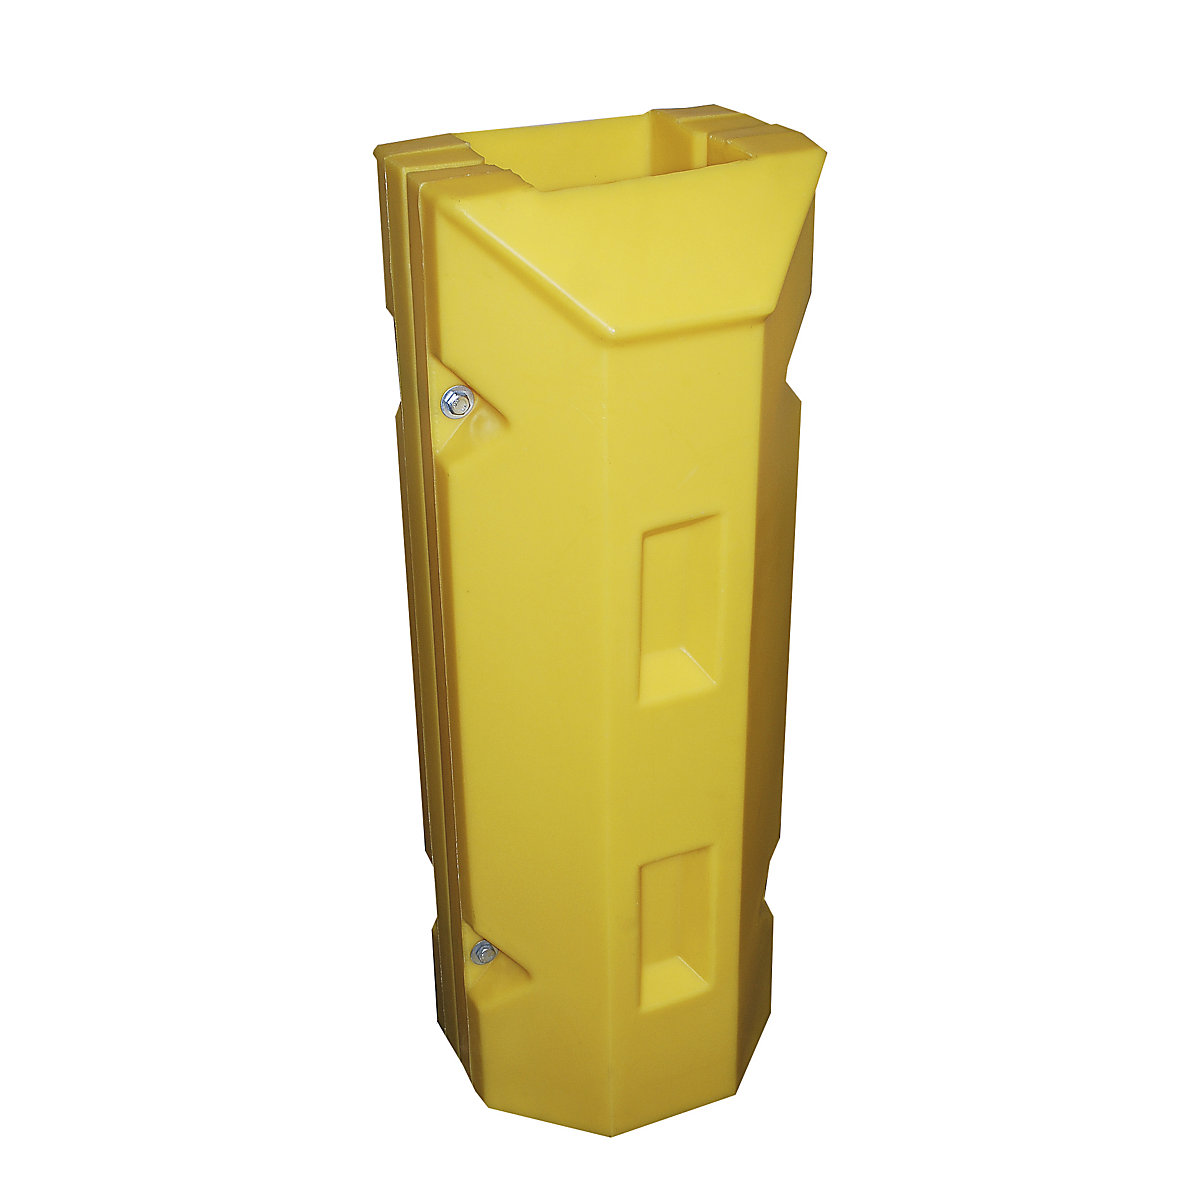 Column and post guard, made of polyethylene, yellow, LxWxH 360 x 350 x 945 mm, internal dimensions 185 x 180 mm-6